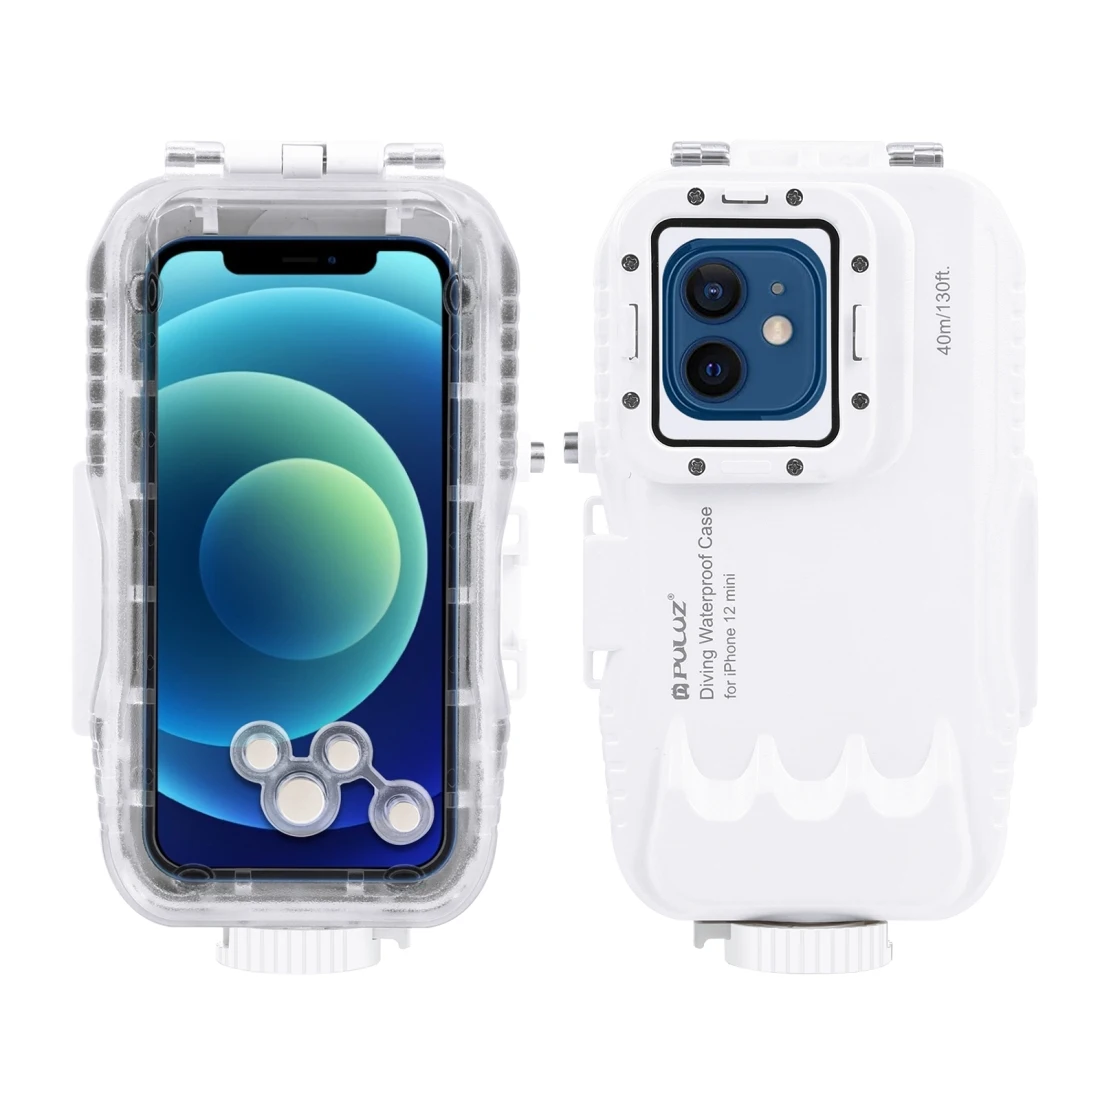 

Original Factory 40m Underwater Depth 130ft Diving Video Case Waterproof phone Housing for iPhone 12 mini and pro Price Chaep, White